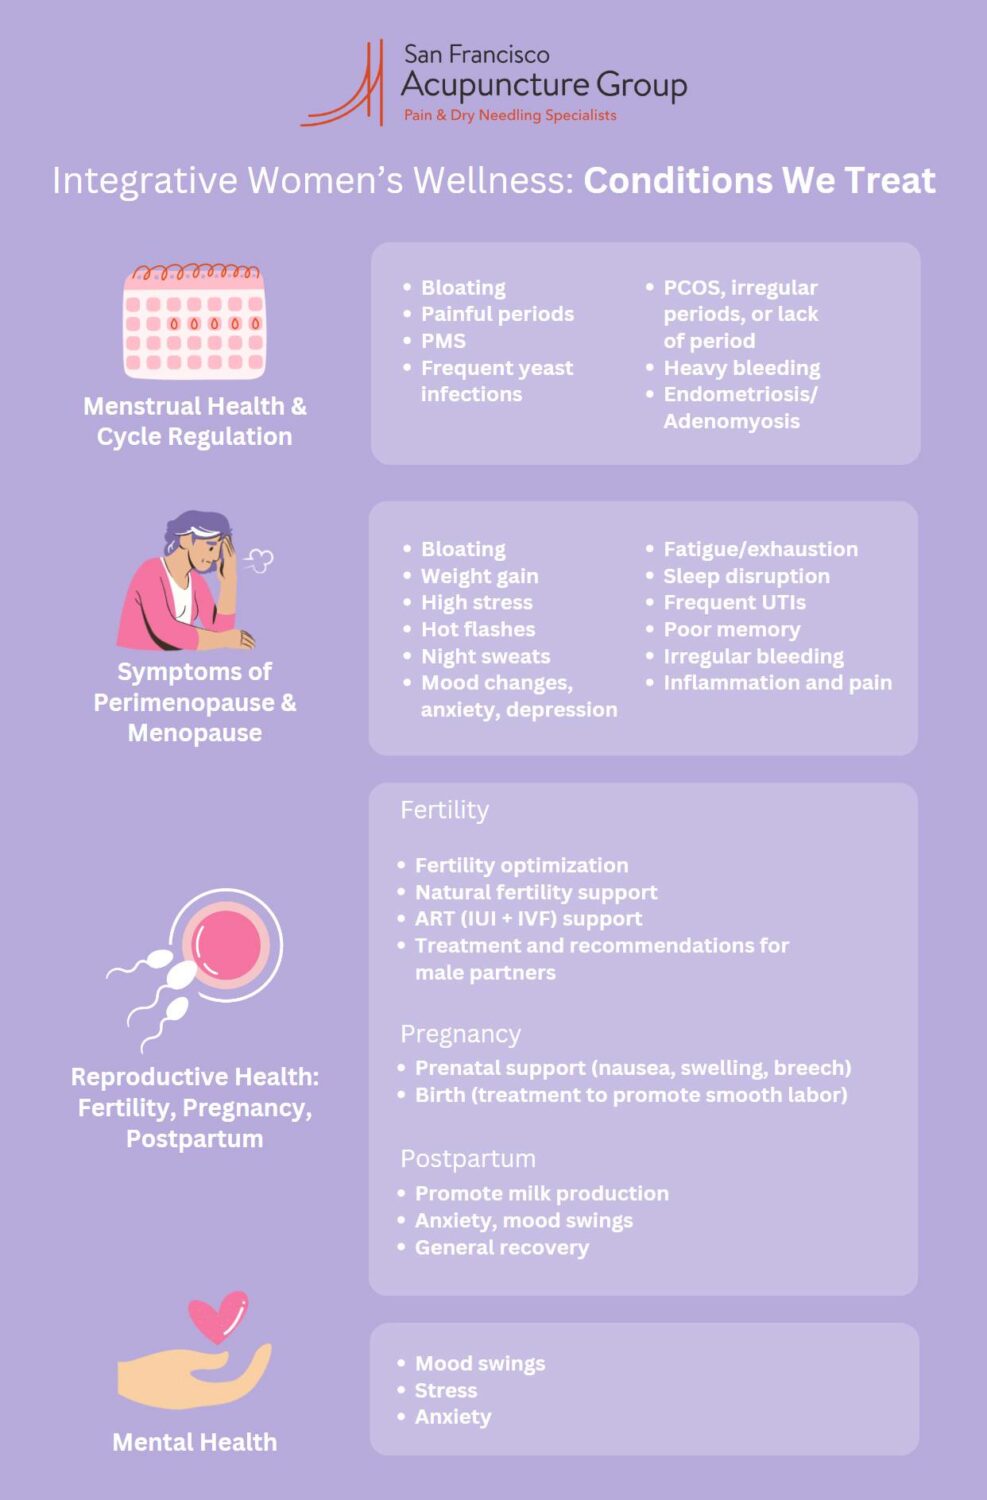 Infographic depicting women's wellness common conditions list: menstrual health and cycle regulation, PMS, painful periods, irritability, cramps, constipation, insomnia, PCOS, irregular periods, lack of period, heavy bleeding, endometriosis; perimenopause and menopause support, hot flashes, night sweats, mood changes, anxiety, depression, menopausal fatigue / exhaustion, sleep disruption, frequent UTIs, poor memory, Irregular bleeding, inflammation and pain; fertility, fertility optimization, natural fertility support, ART (IUI + IVF) support, in many cases of subfertility, male partners are highly encouraged to improve diet and lifestyle and seek treatment from urologists to improve the couples’ odds; pregnancy, prenatal support (nausea, swelling, breech), birth (treatment to promote smooth labor, nursing support); postpartum, milk production, anxiety, mood swings, general recovery; mental health, mood swings, stress, anxiety.